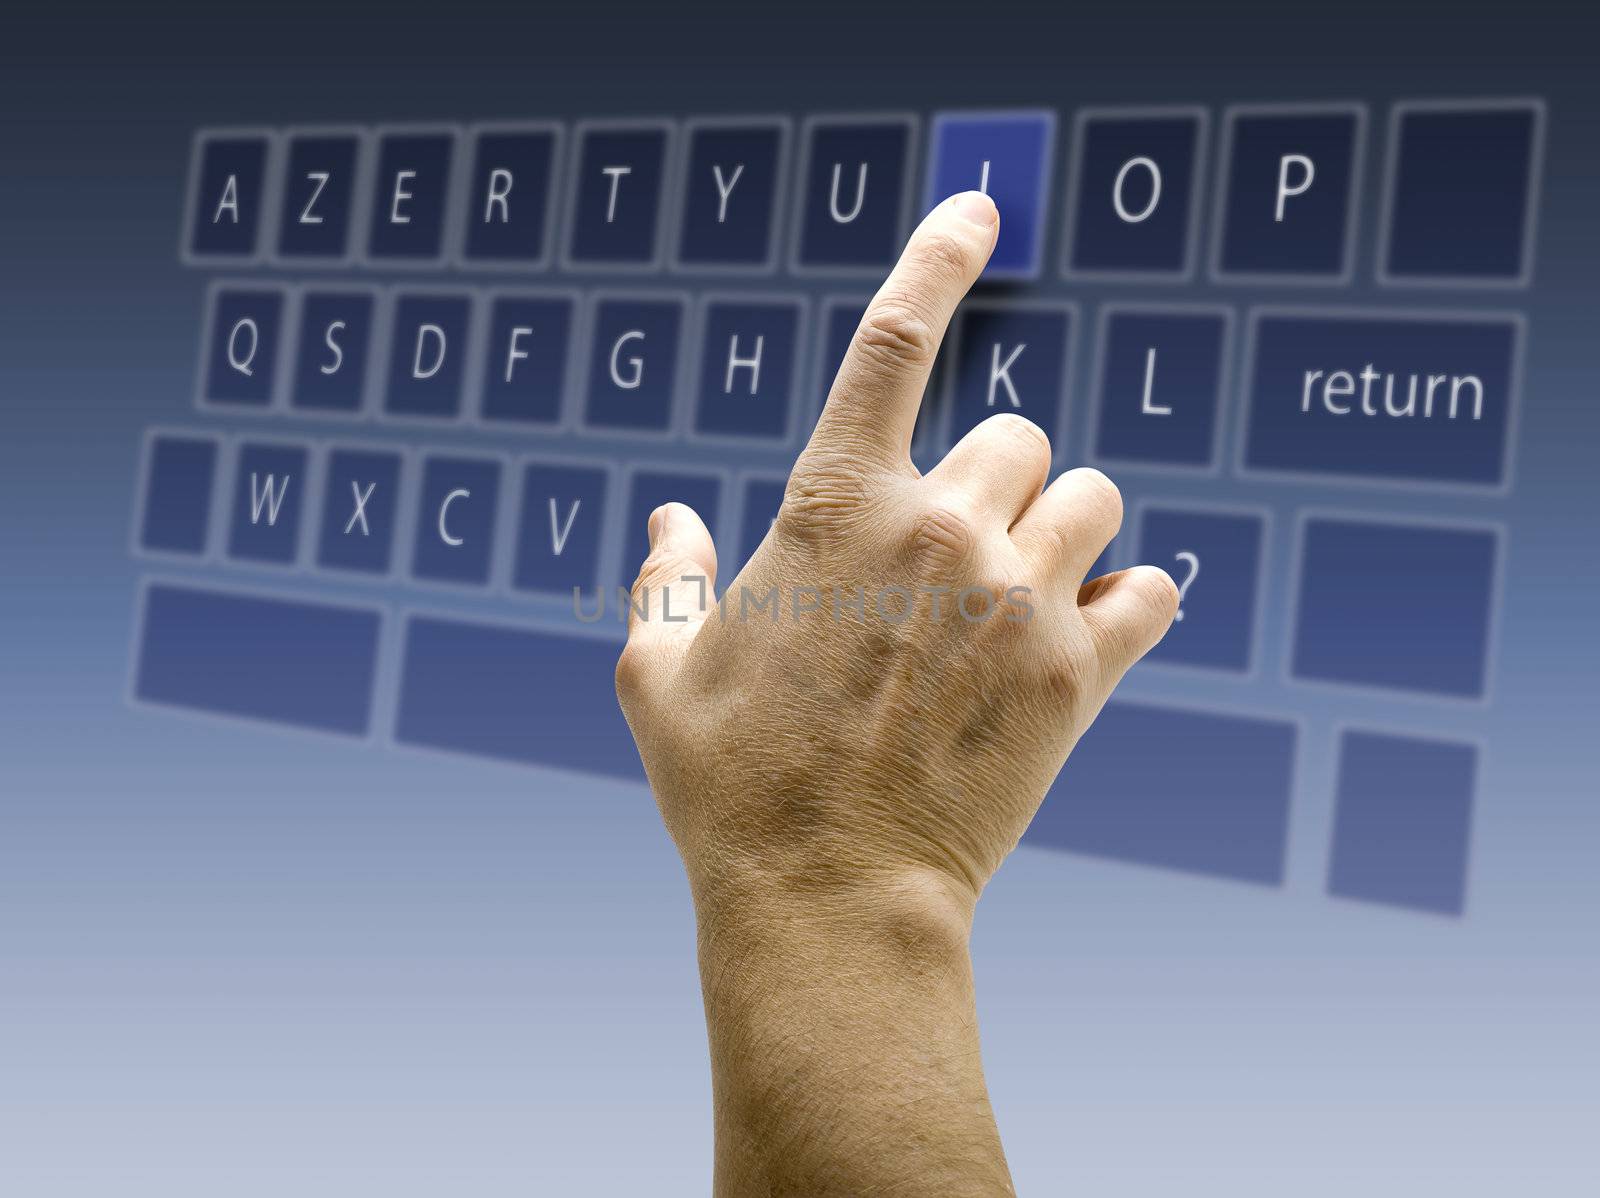 Touchscreen keyboard and interface